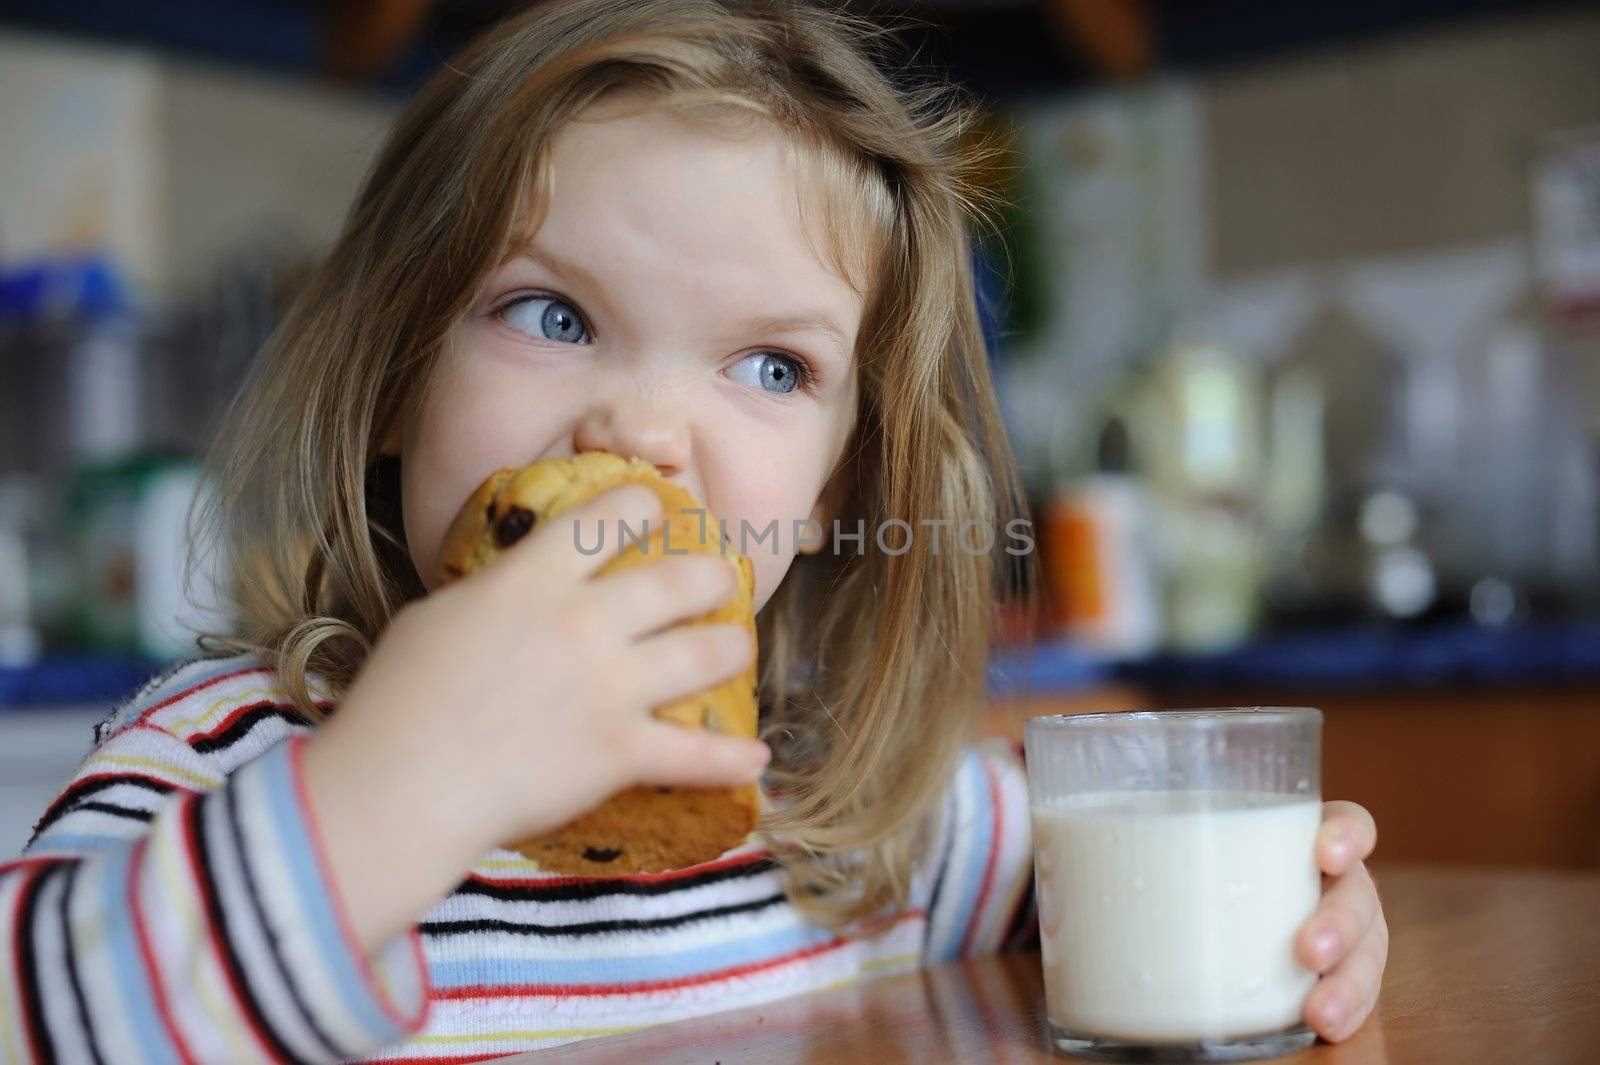 An image of a girl eating cookie with milk